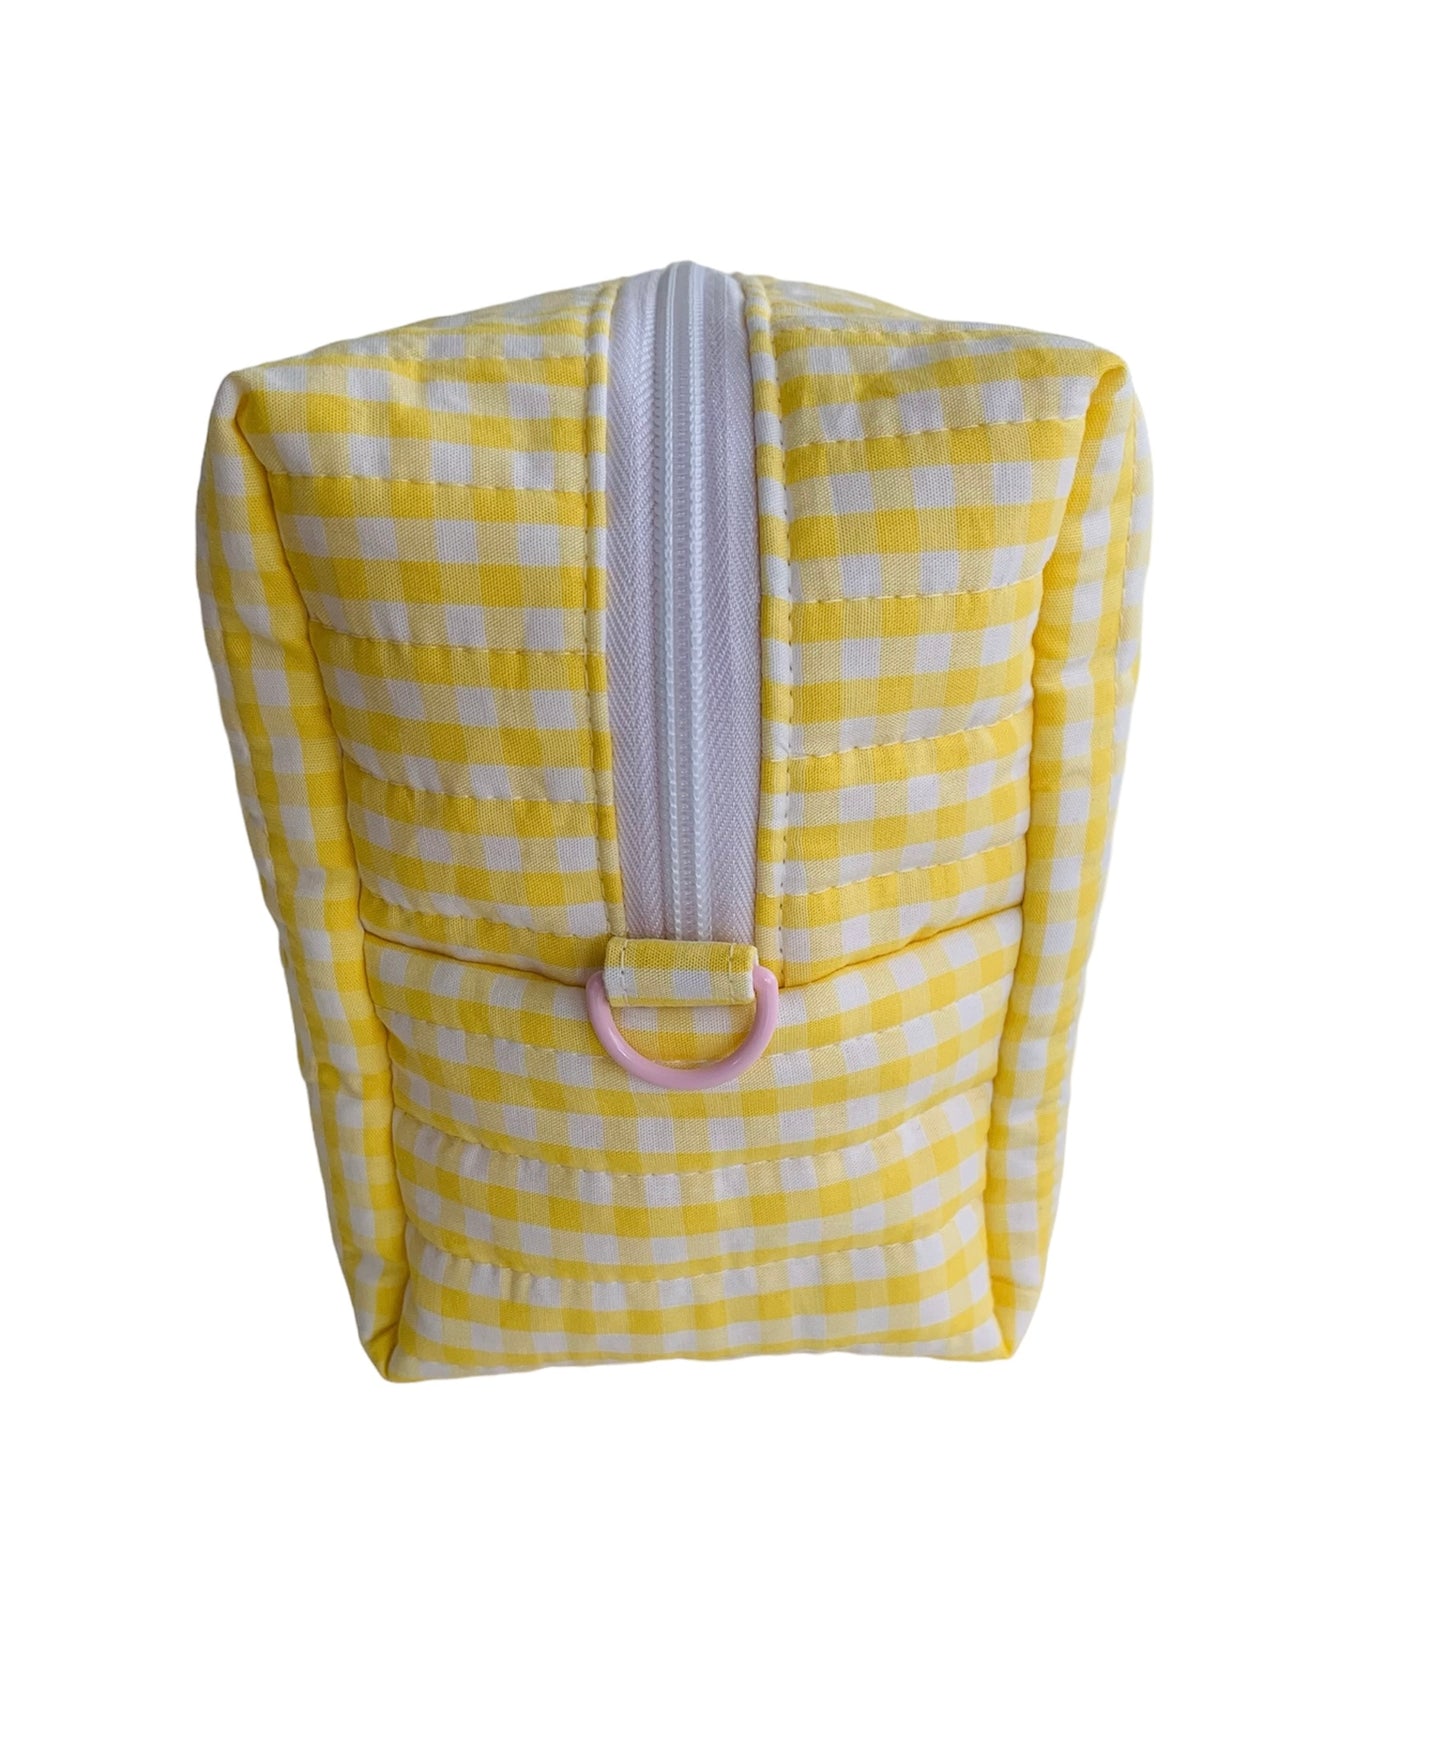 Large Yellow Gingham Carry All Make Up Bag